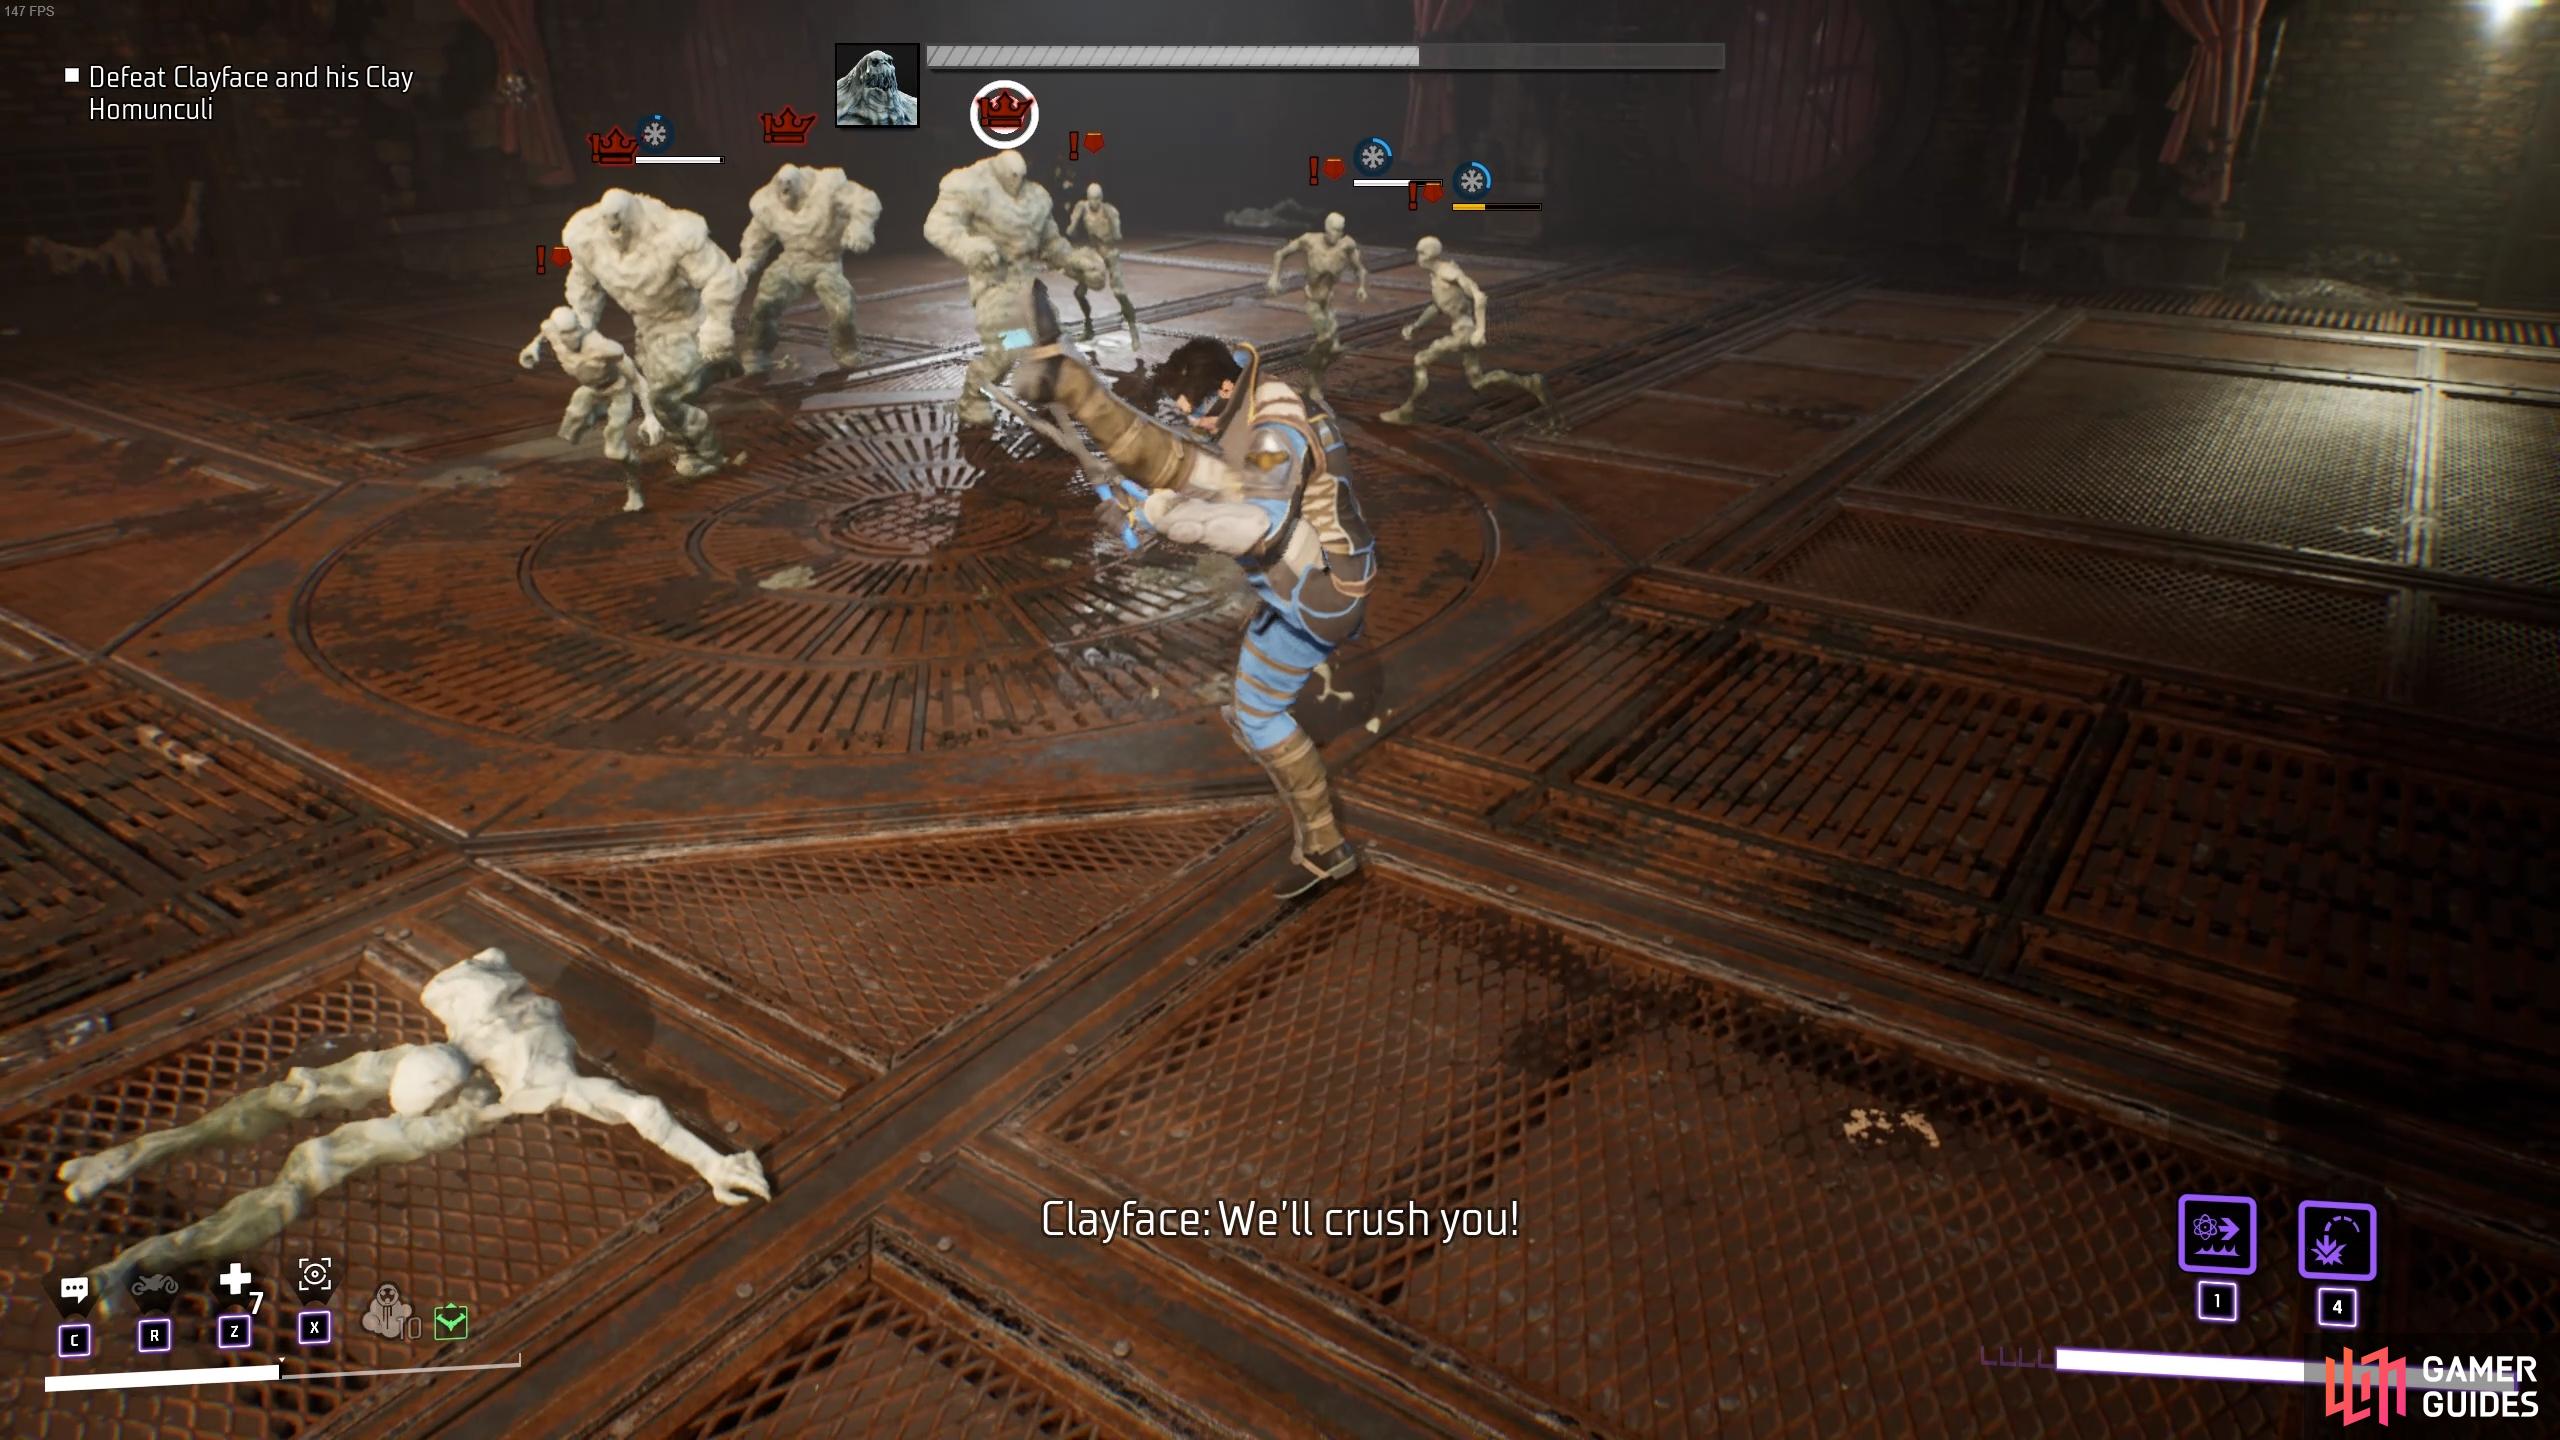 You'll need to defeat a number of humanoid clay mimics during the second phase of the fight.